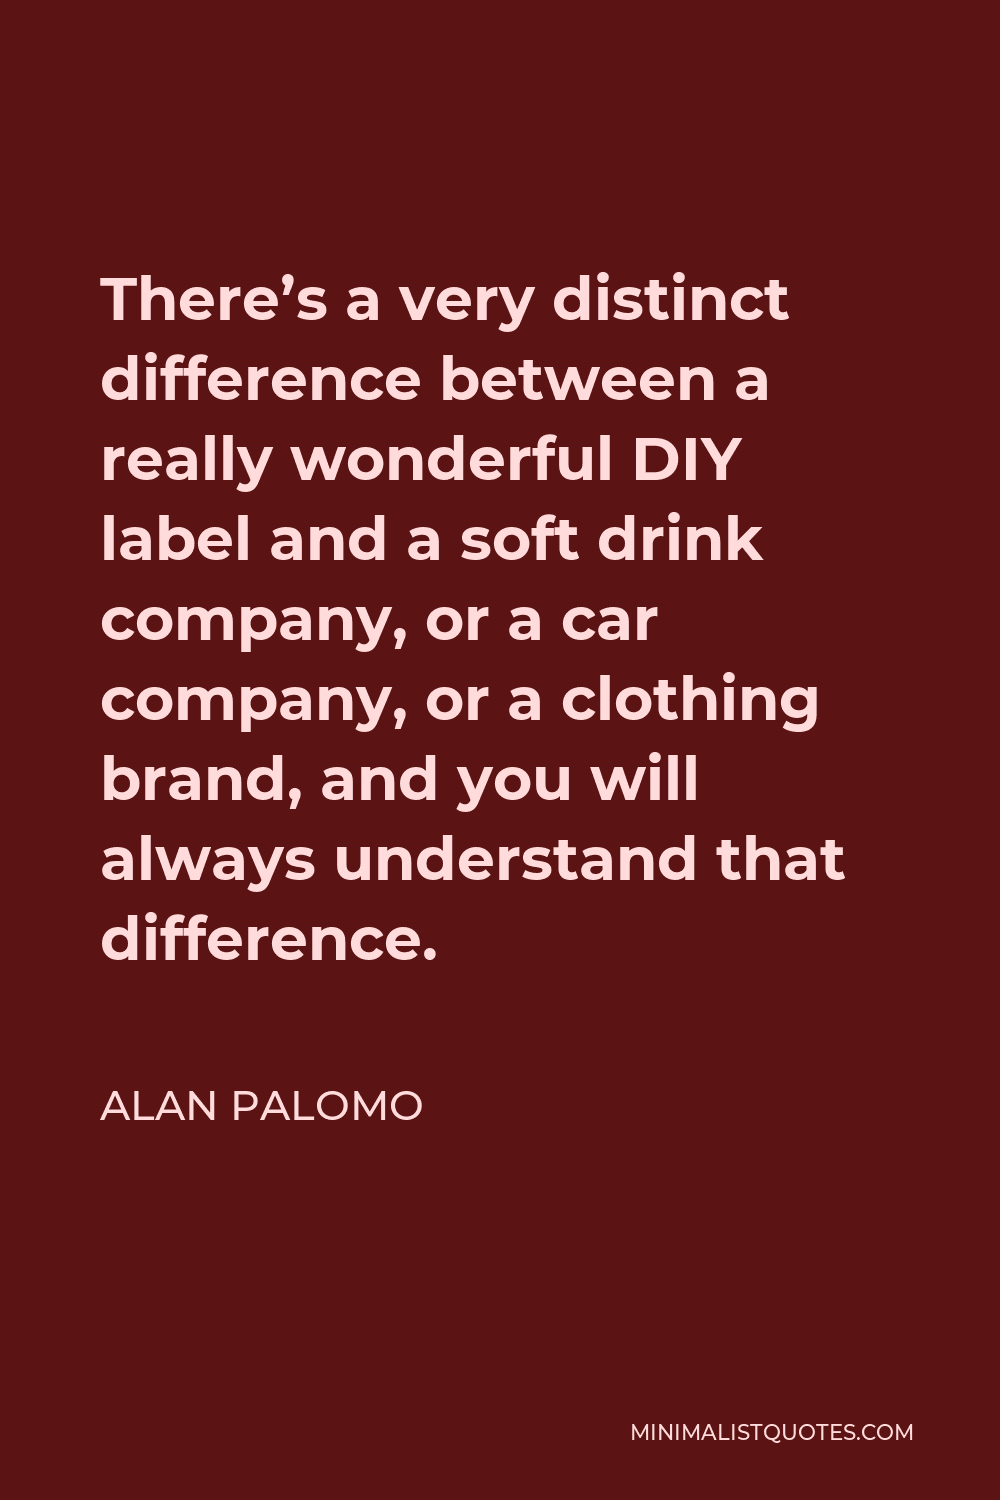 Alan Palomo Quote - There’s a very distinct difference between a really wonderful DIY label and a soft drink company, or a car company, or a clothing brand, and you will always understand that difference.